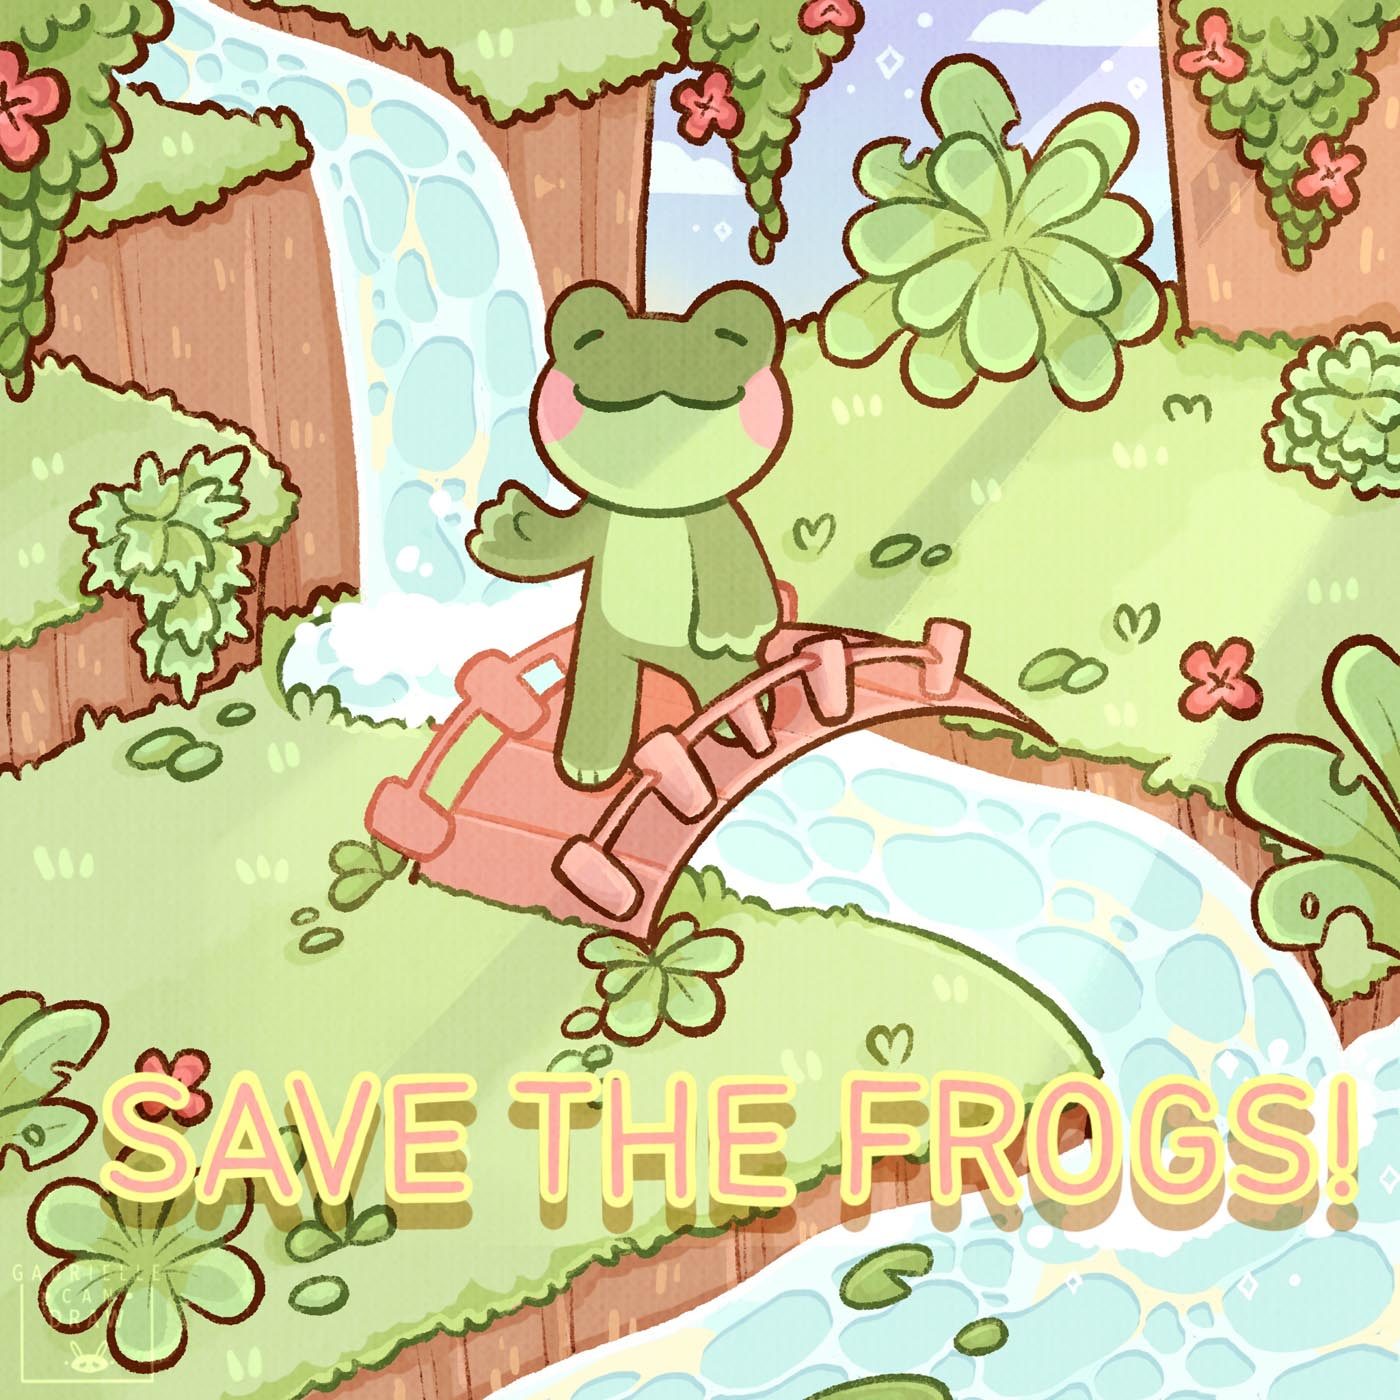 Gabrielle-Galarneau-Canada-2021-save-the-frogs-art-contest 第四名获胜者